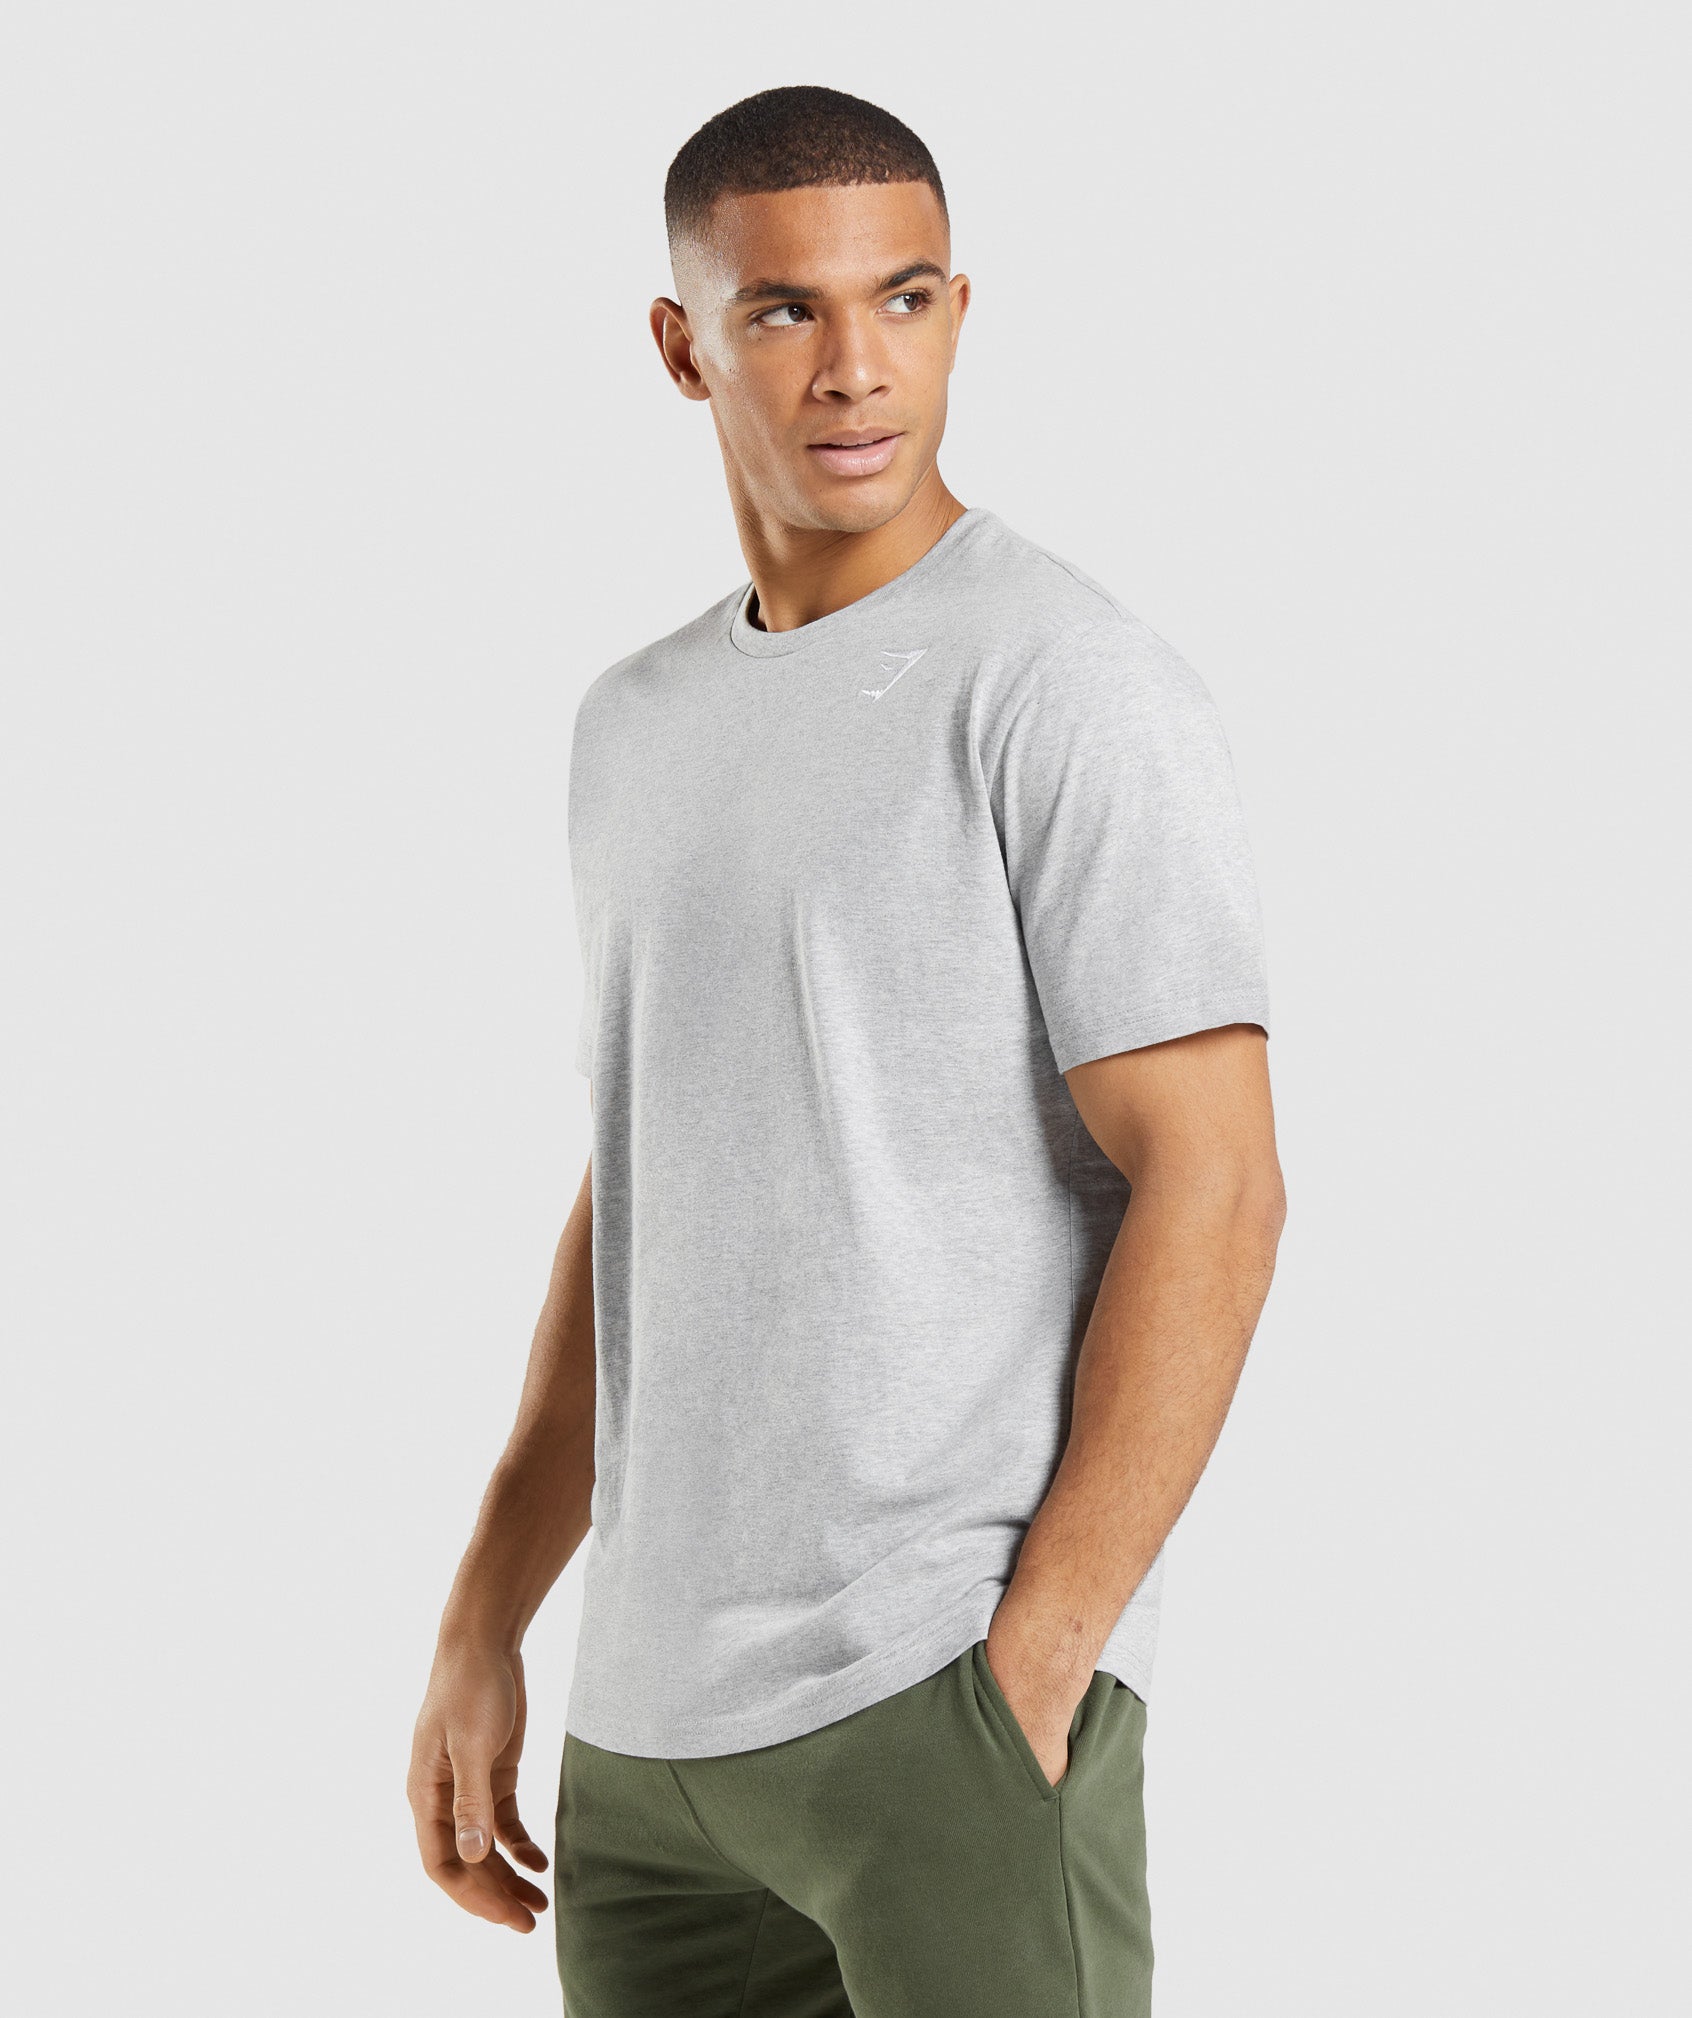 Crest T-Shirt in Light Grey Marl - view 3